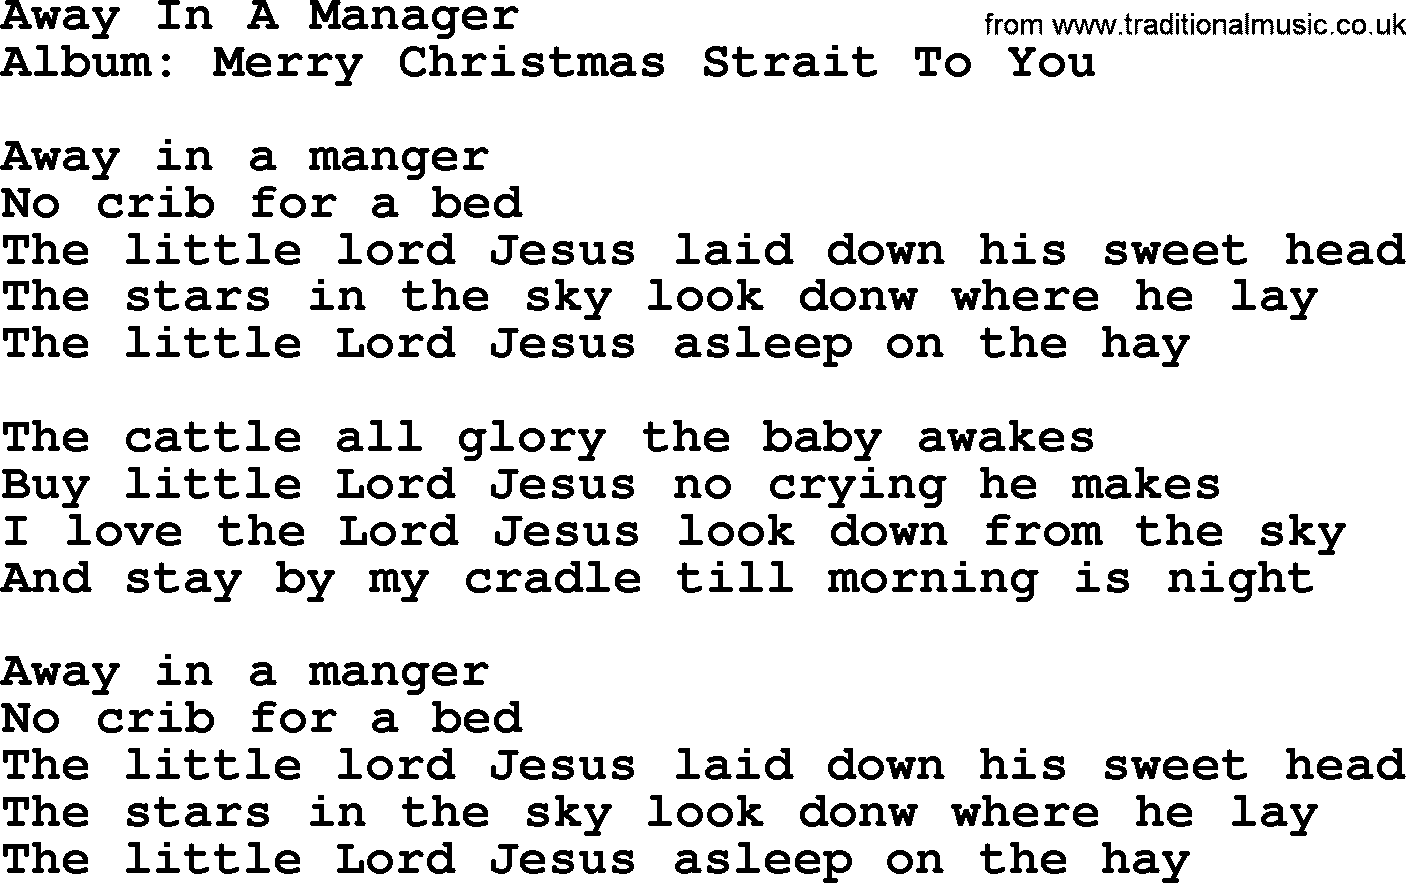 George Strait song: Away In A Manager, lyrics